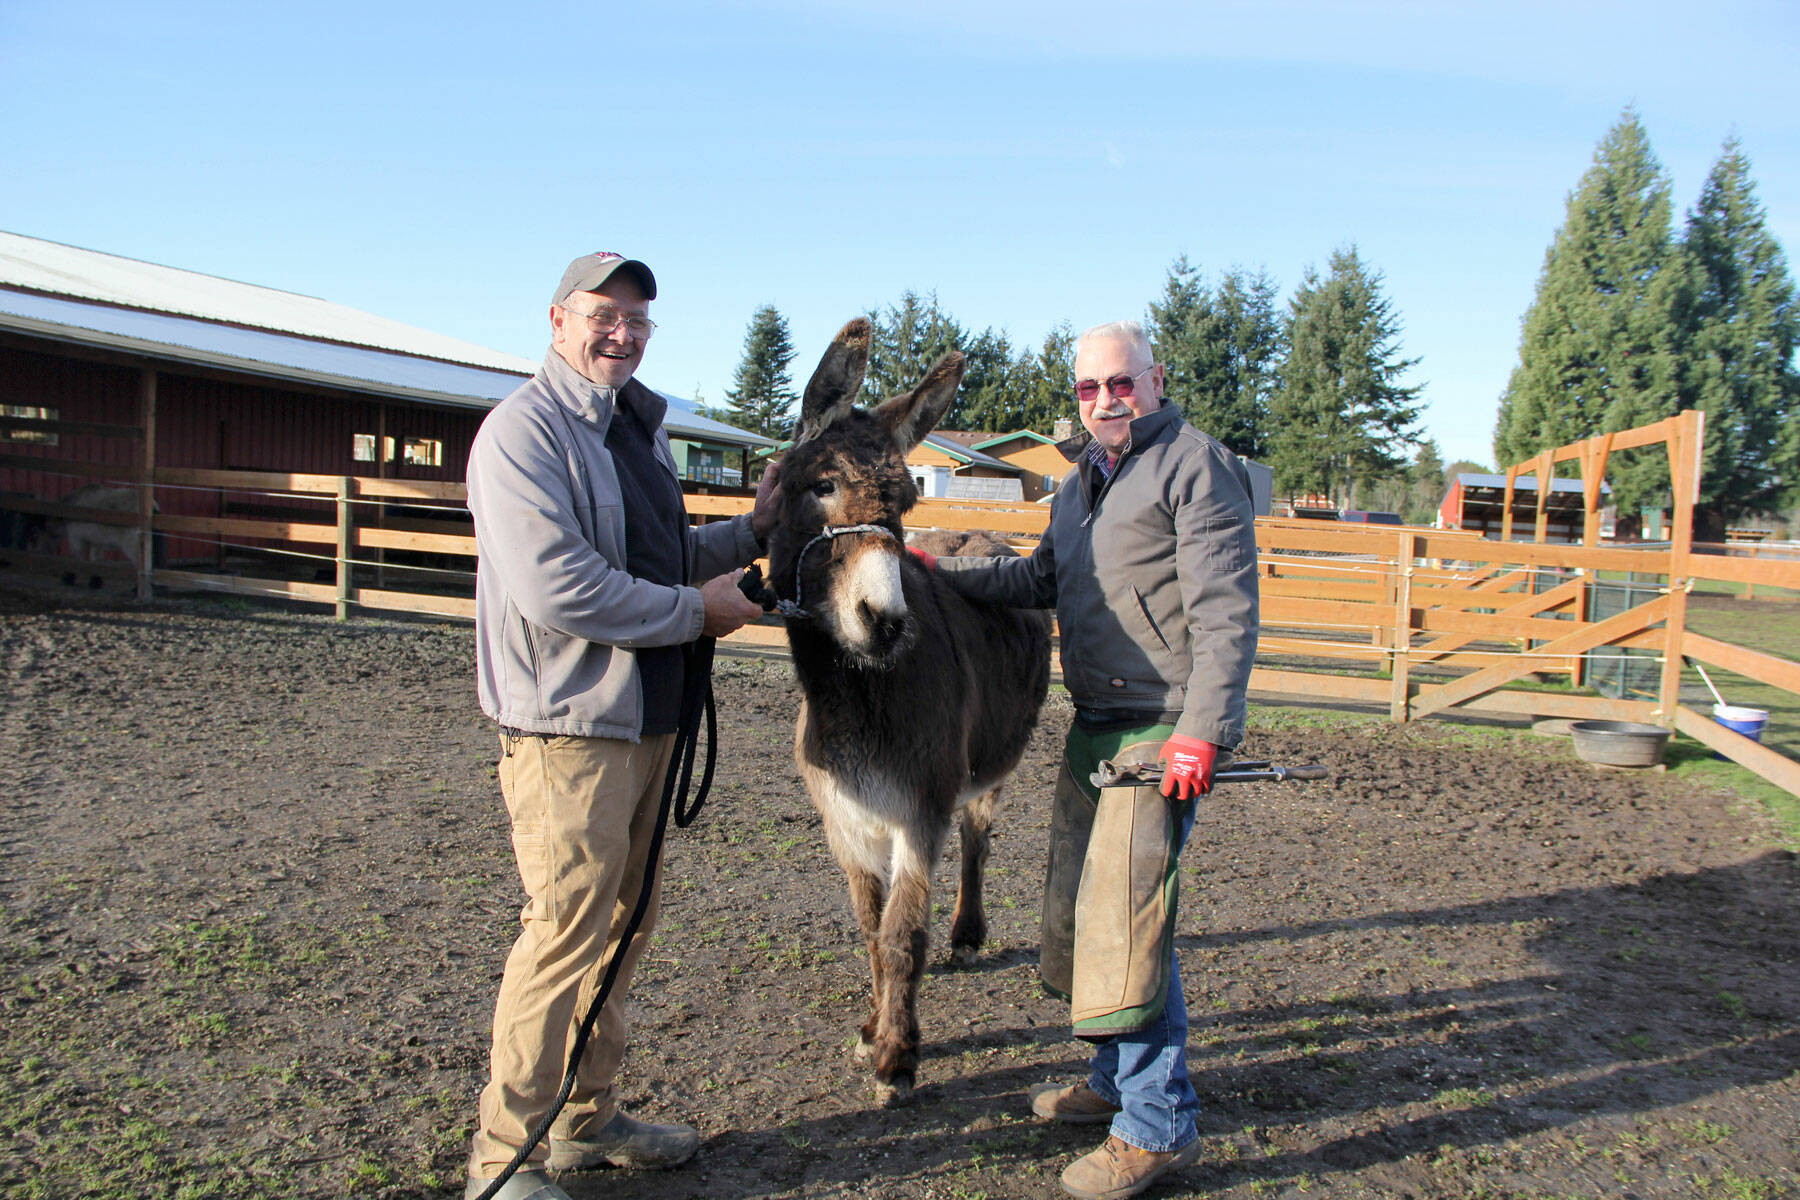 Snickers the rescued donkey with owner Tony Boaz, left, and farrier Glade Rankin. (Karen Griffiths / for Peninsula Daily News)
Snickers the rescued donkey with owner Tony Boaz, left, and farrier Glade Rankin. (Karen Griffiths / for Peninsula Daily News)